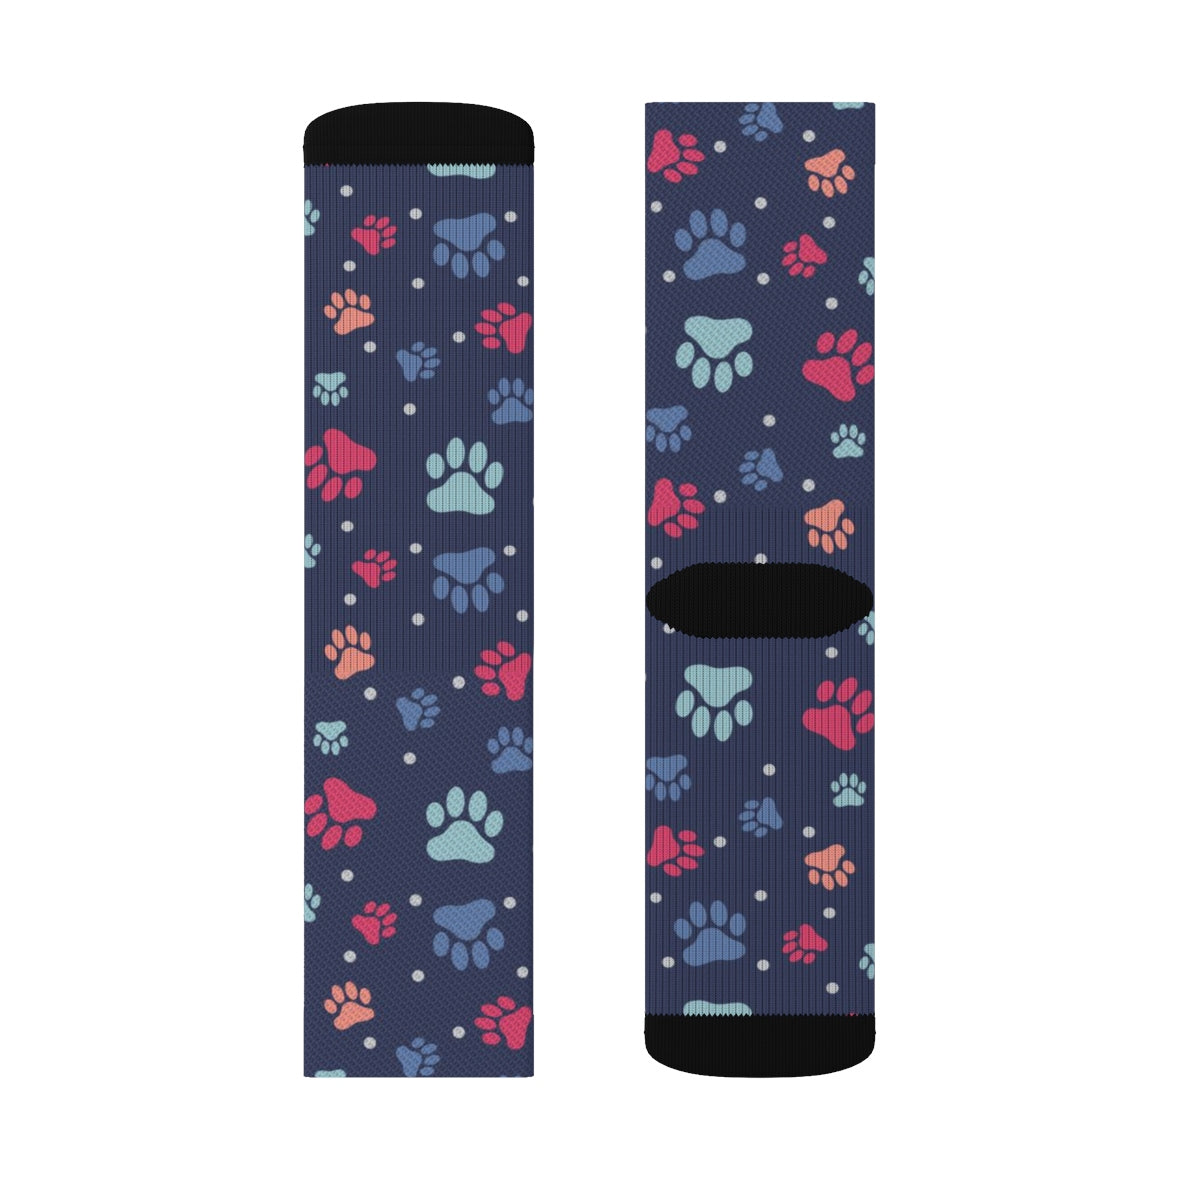 Dog Paws Pattern Socks, Blue 3D Sublimation Socks Women Mom Men Funny Fun Novelty Cool Funky Crazy Casual Cute Unique Gift Starcove Fashion